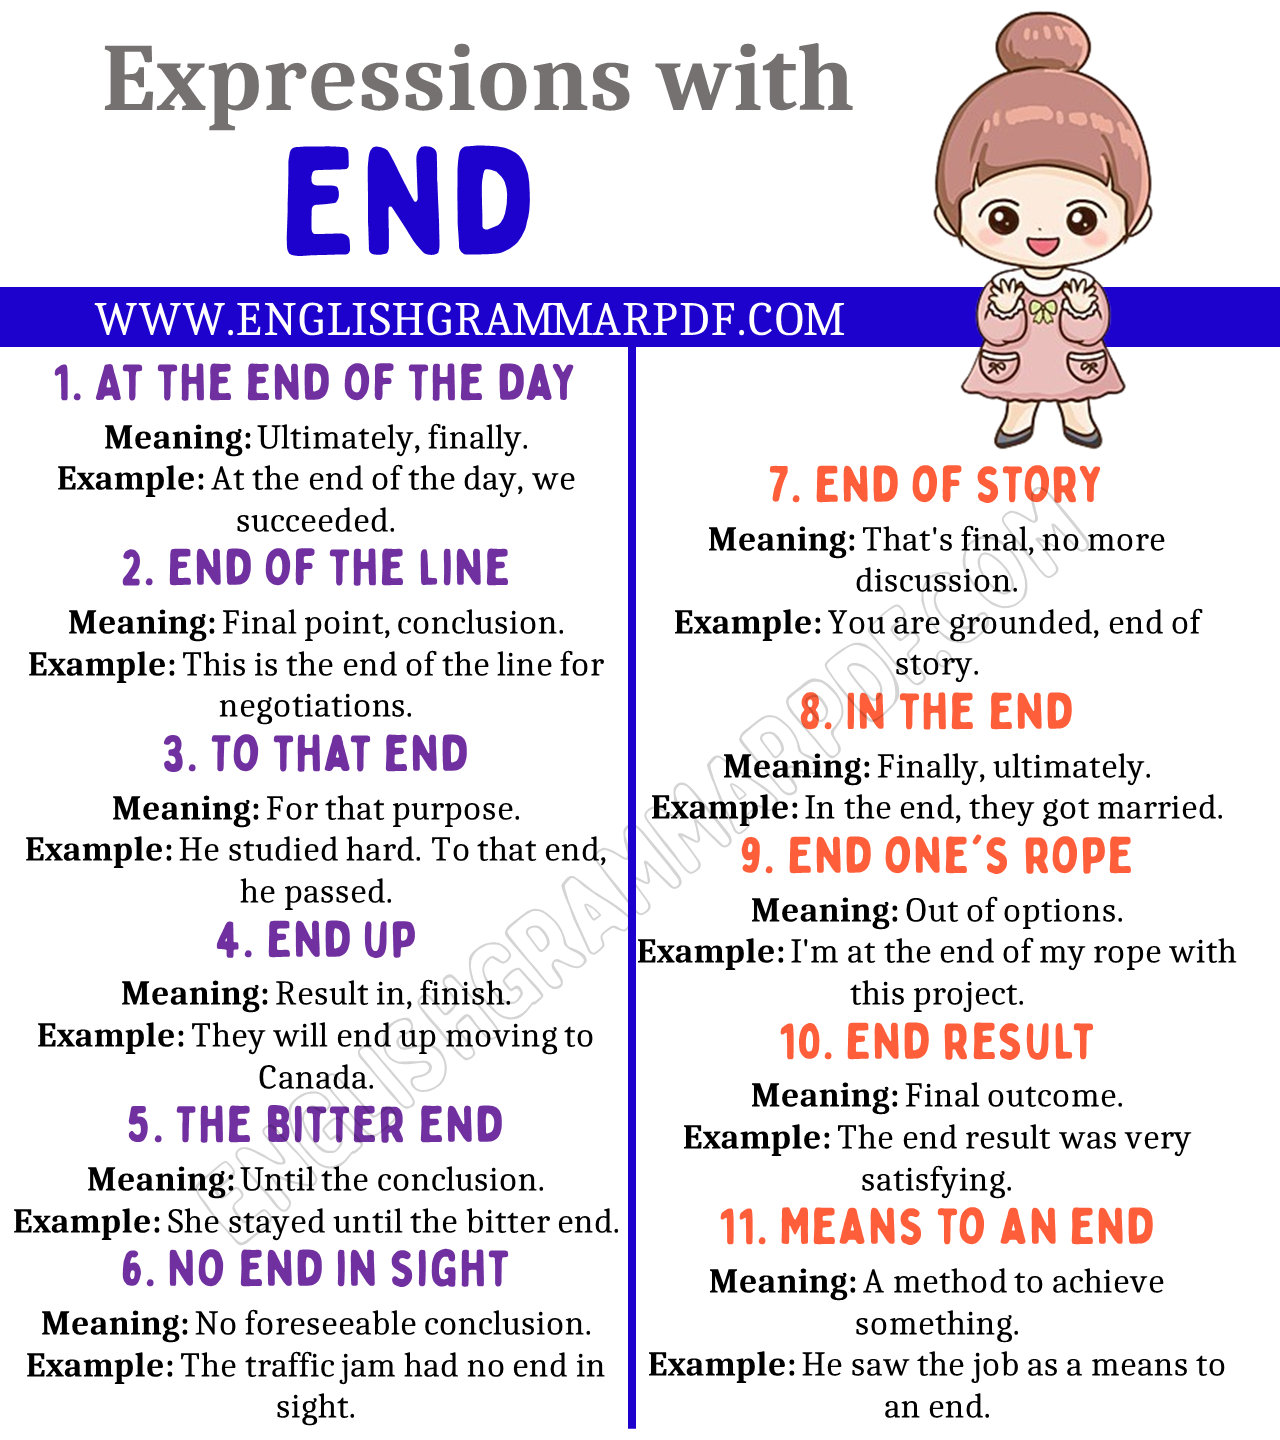 Expressions with End